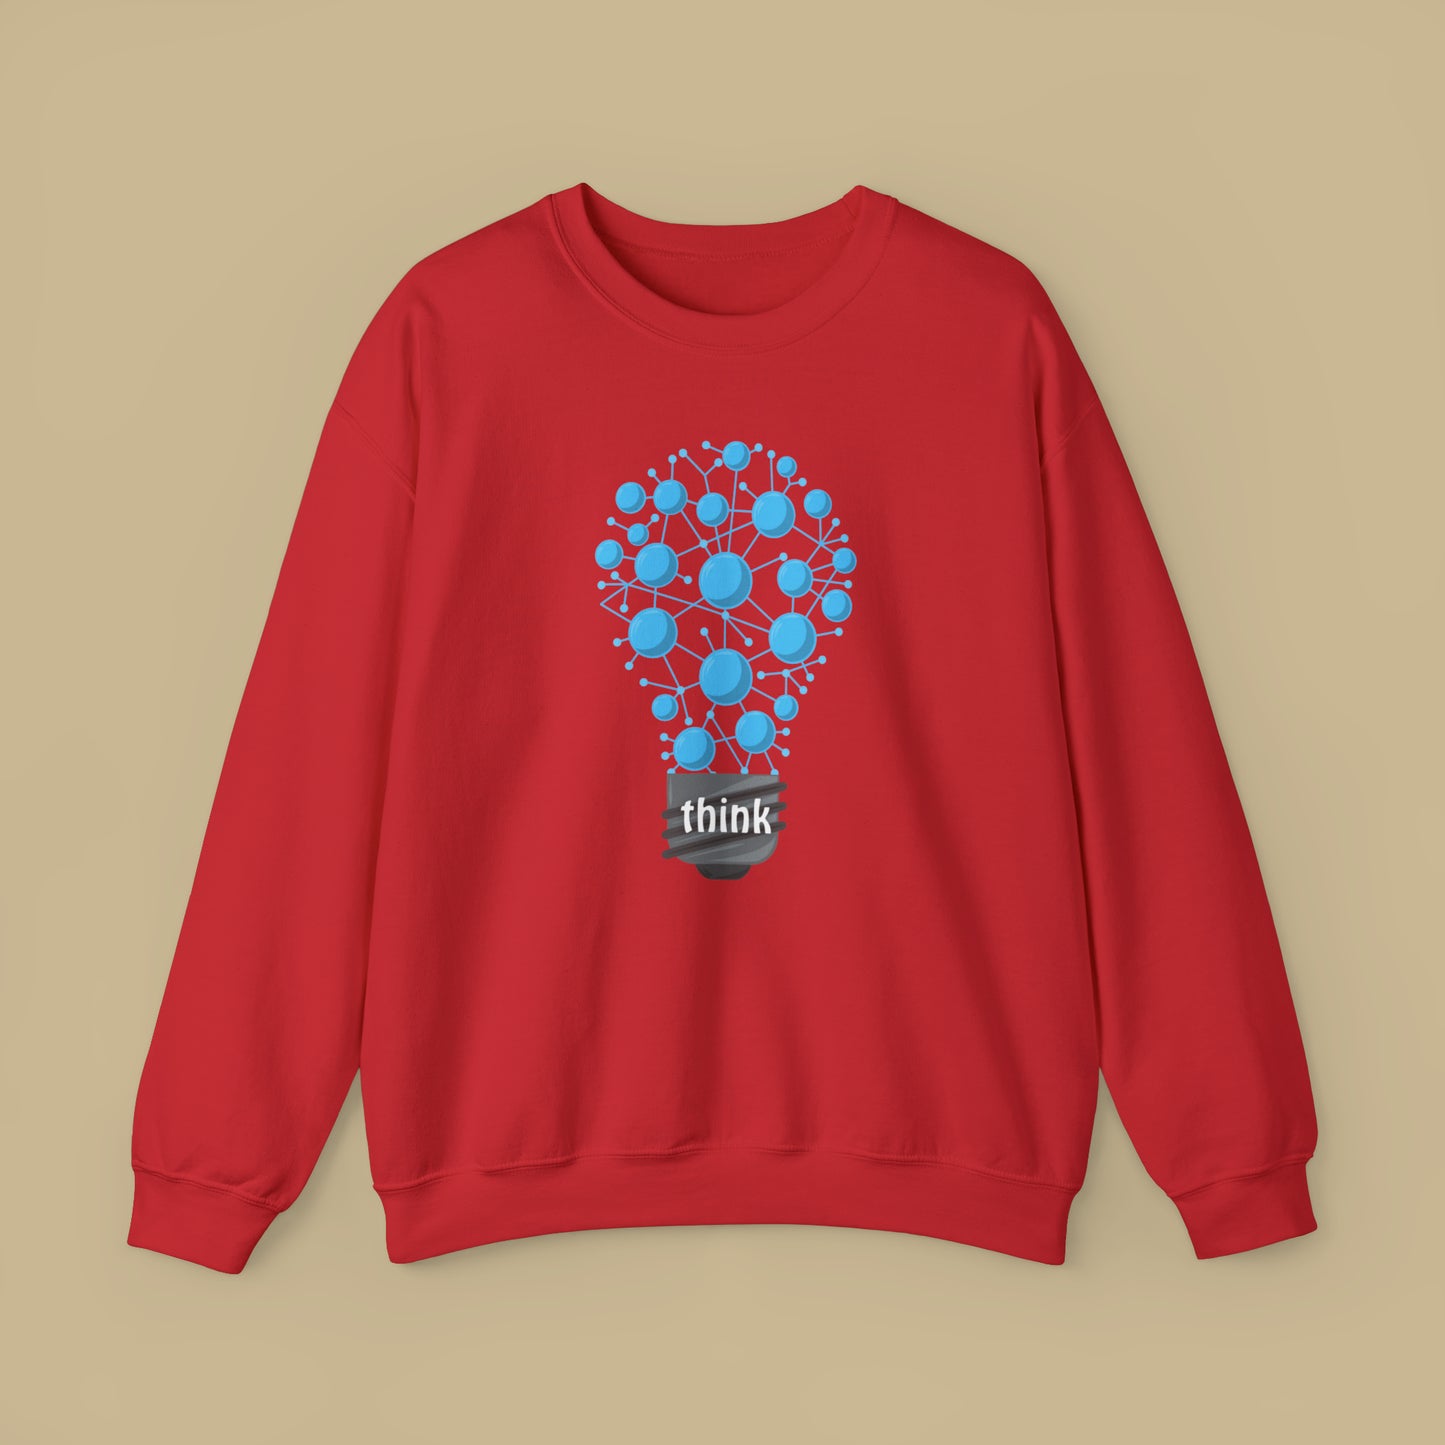 Don’t you love that aha moment when you “think” and figure things out? This sweatshirt encourages us to exercise our brains! Give the gift of this Unisex Heavy Blend™ Crewneck Sweatshirt or get one for yourself.